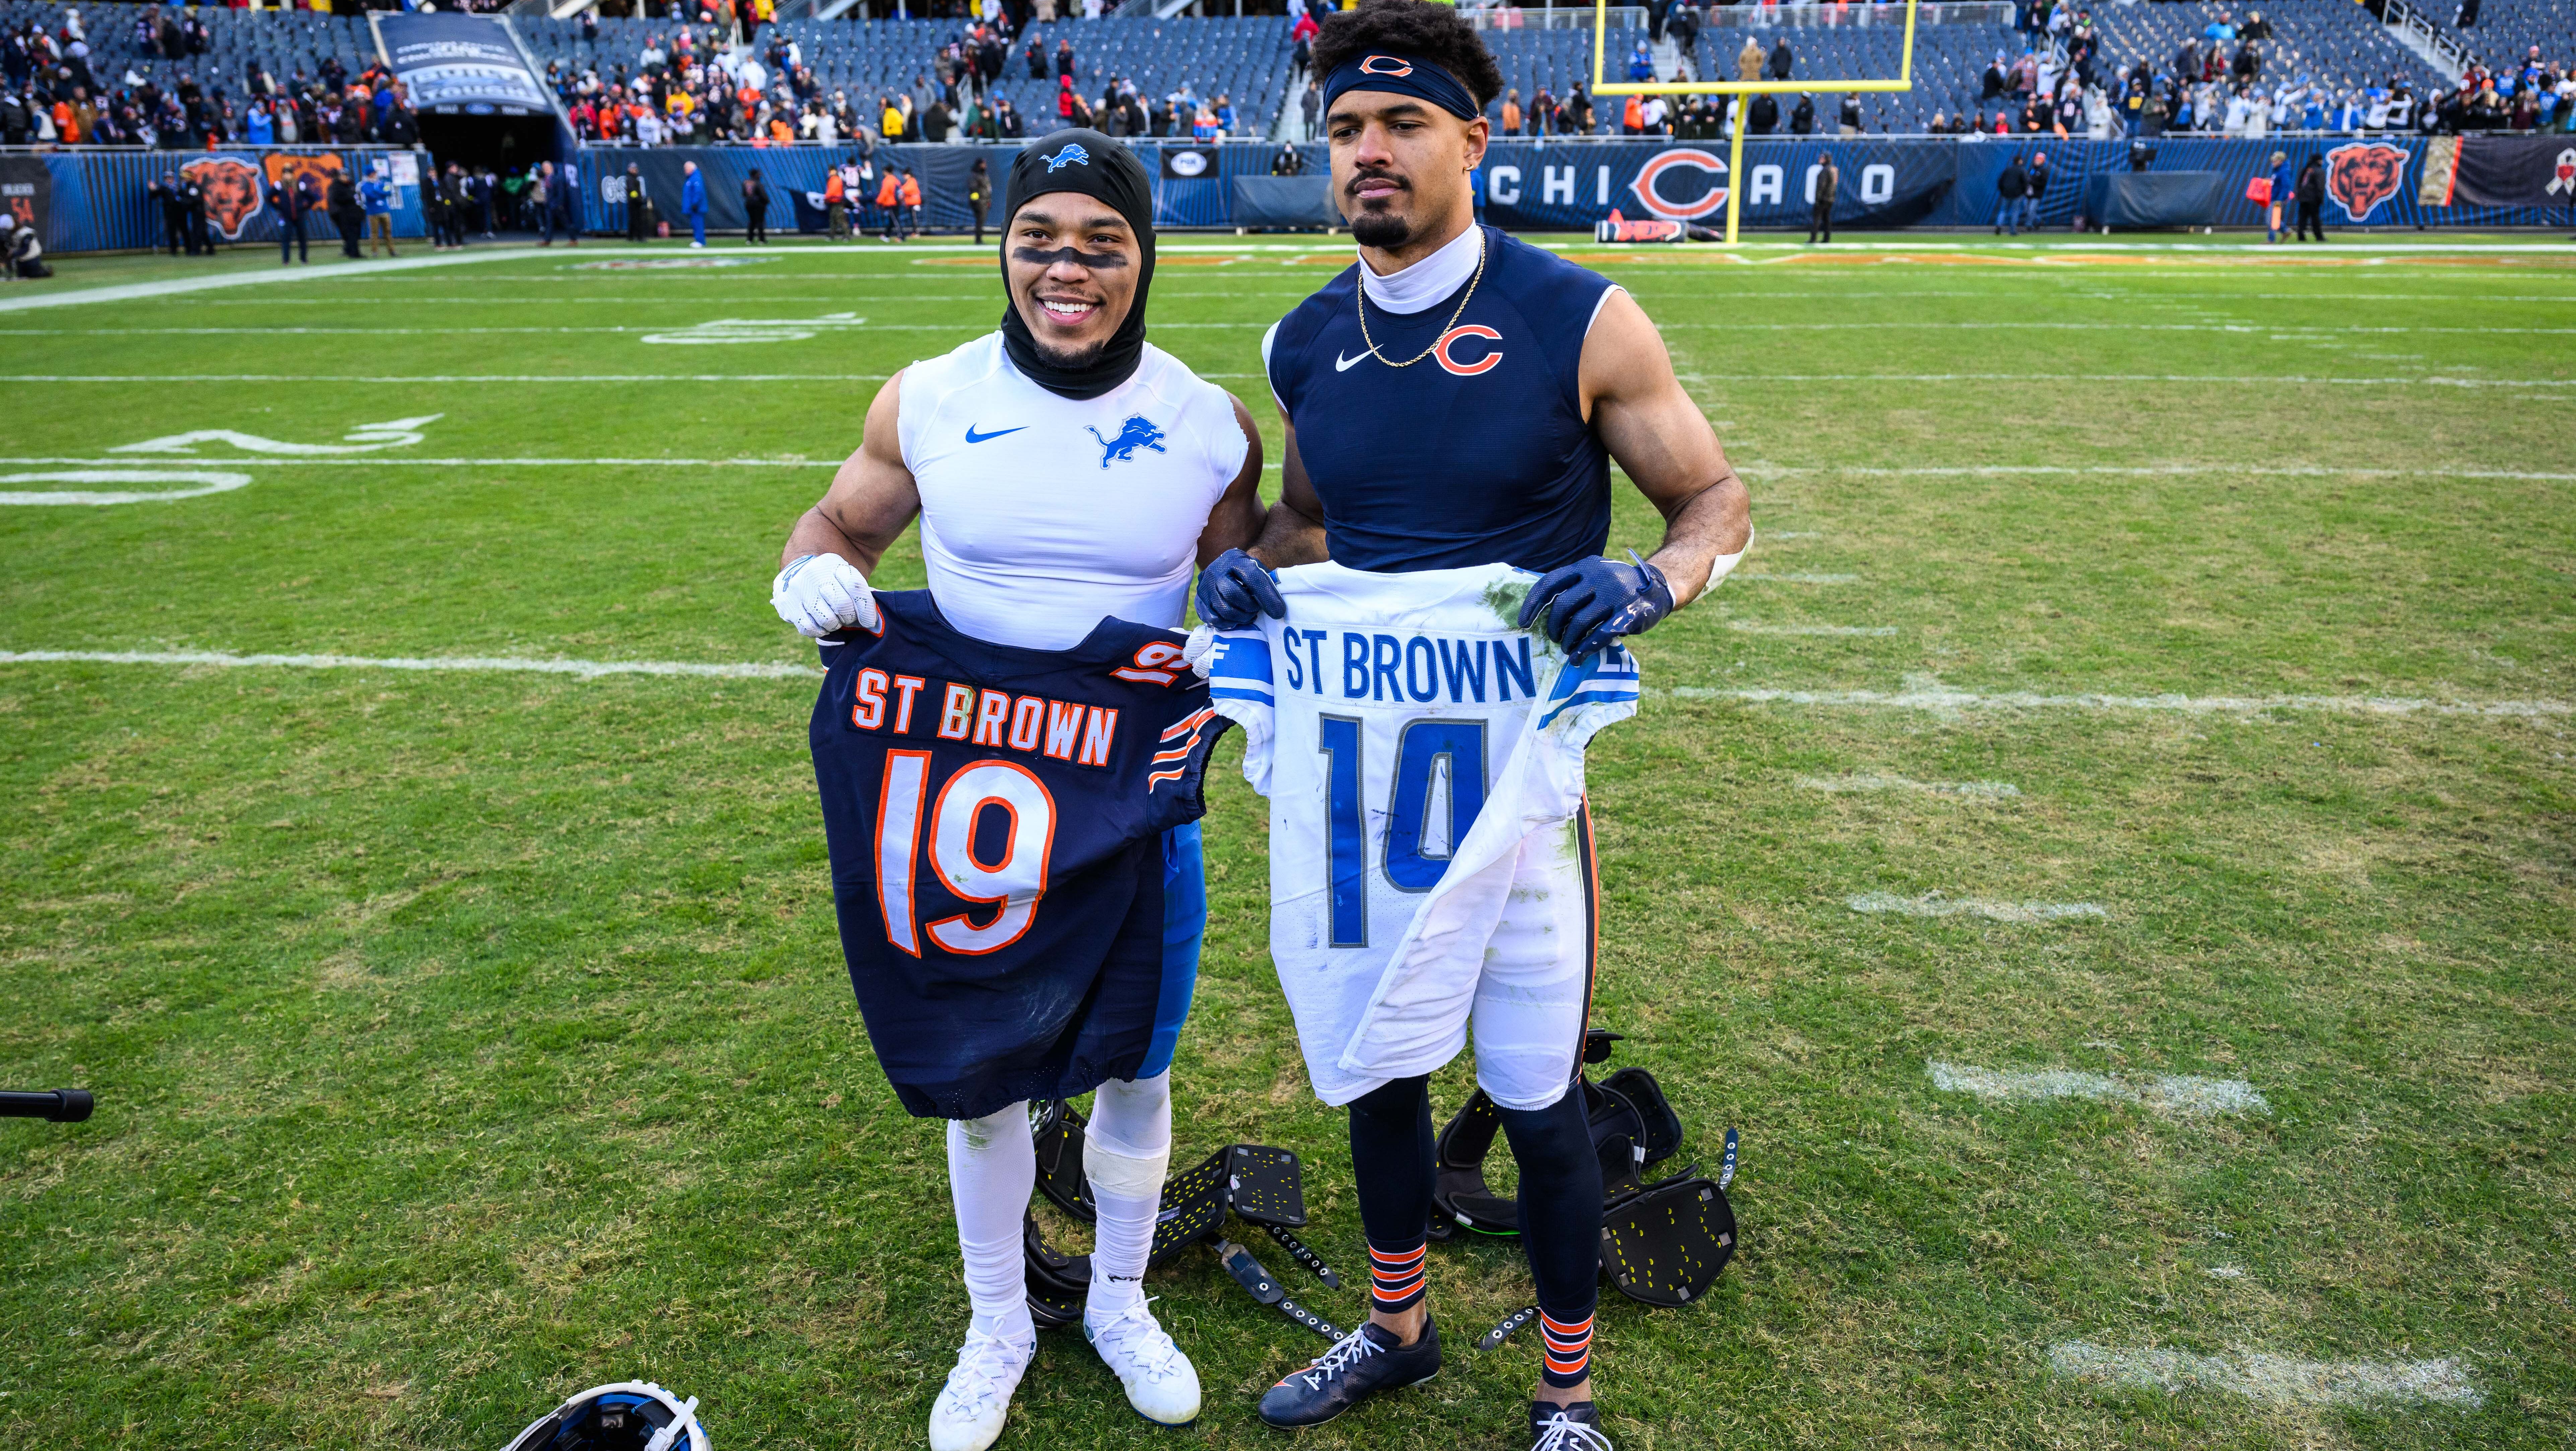 Detroit Lions wide receiver Amon-Ra St. Brown and Chicago Bears wide receiver Equanimeous St. Brown